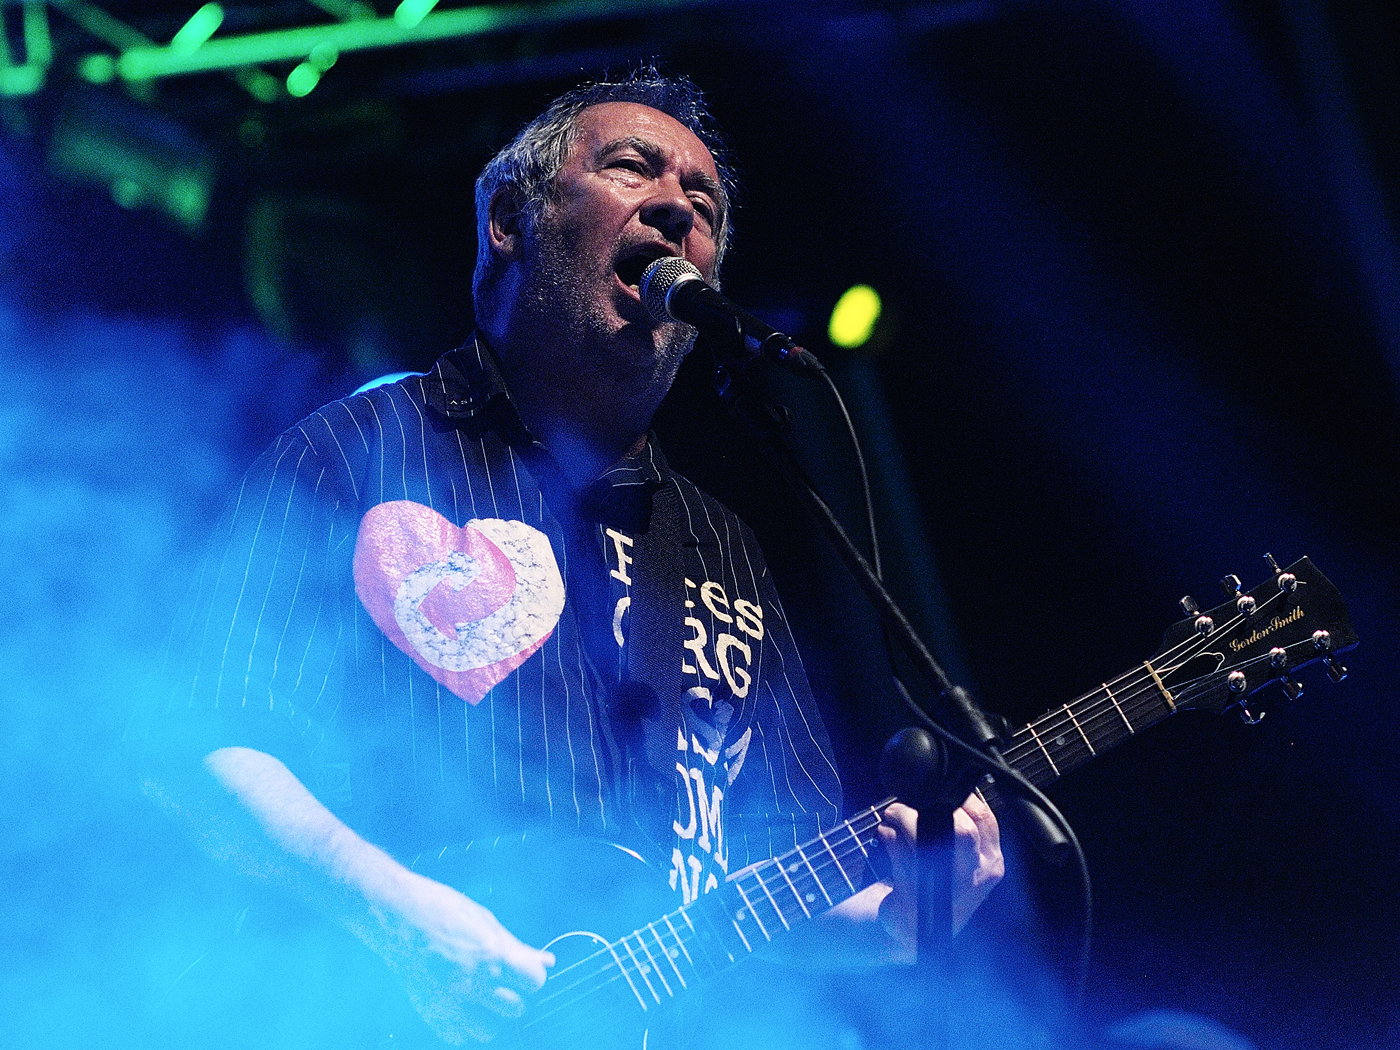 Pete Shelley, frontman of Buzzcocks, dead at 63